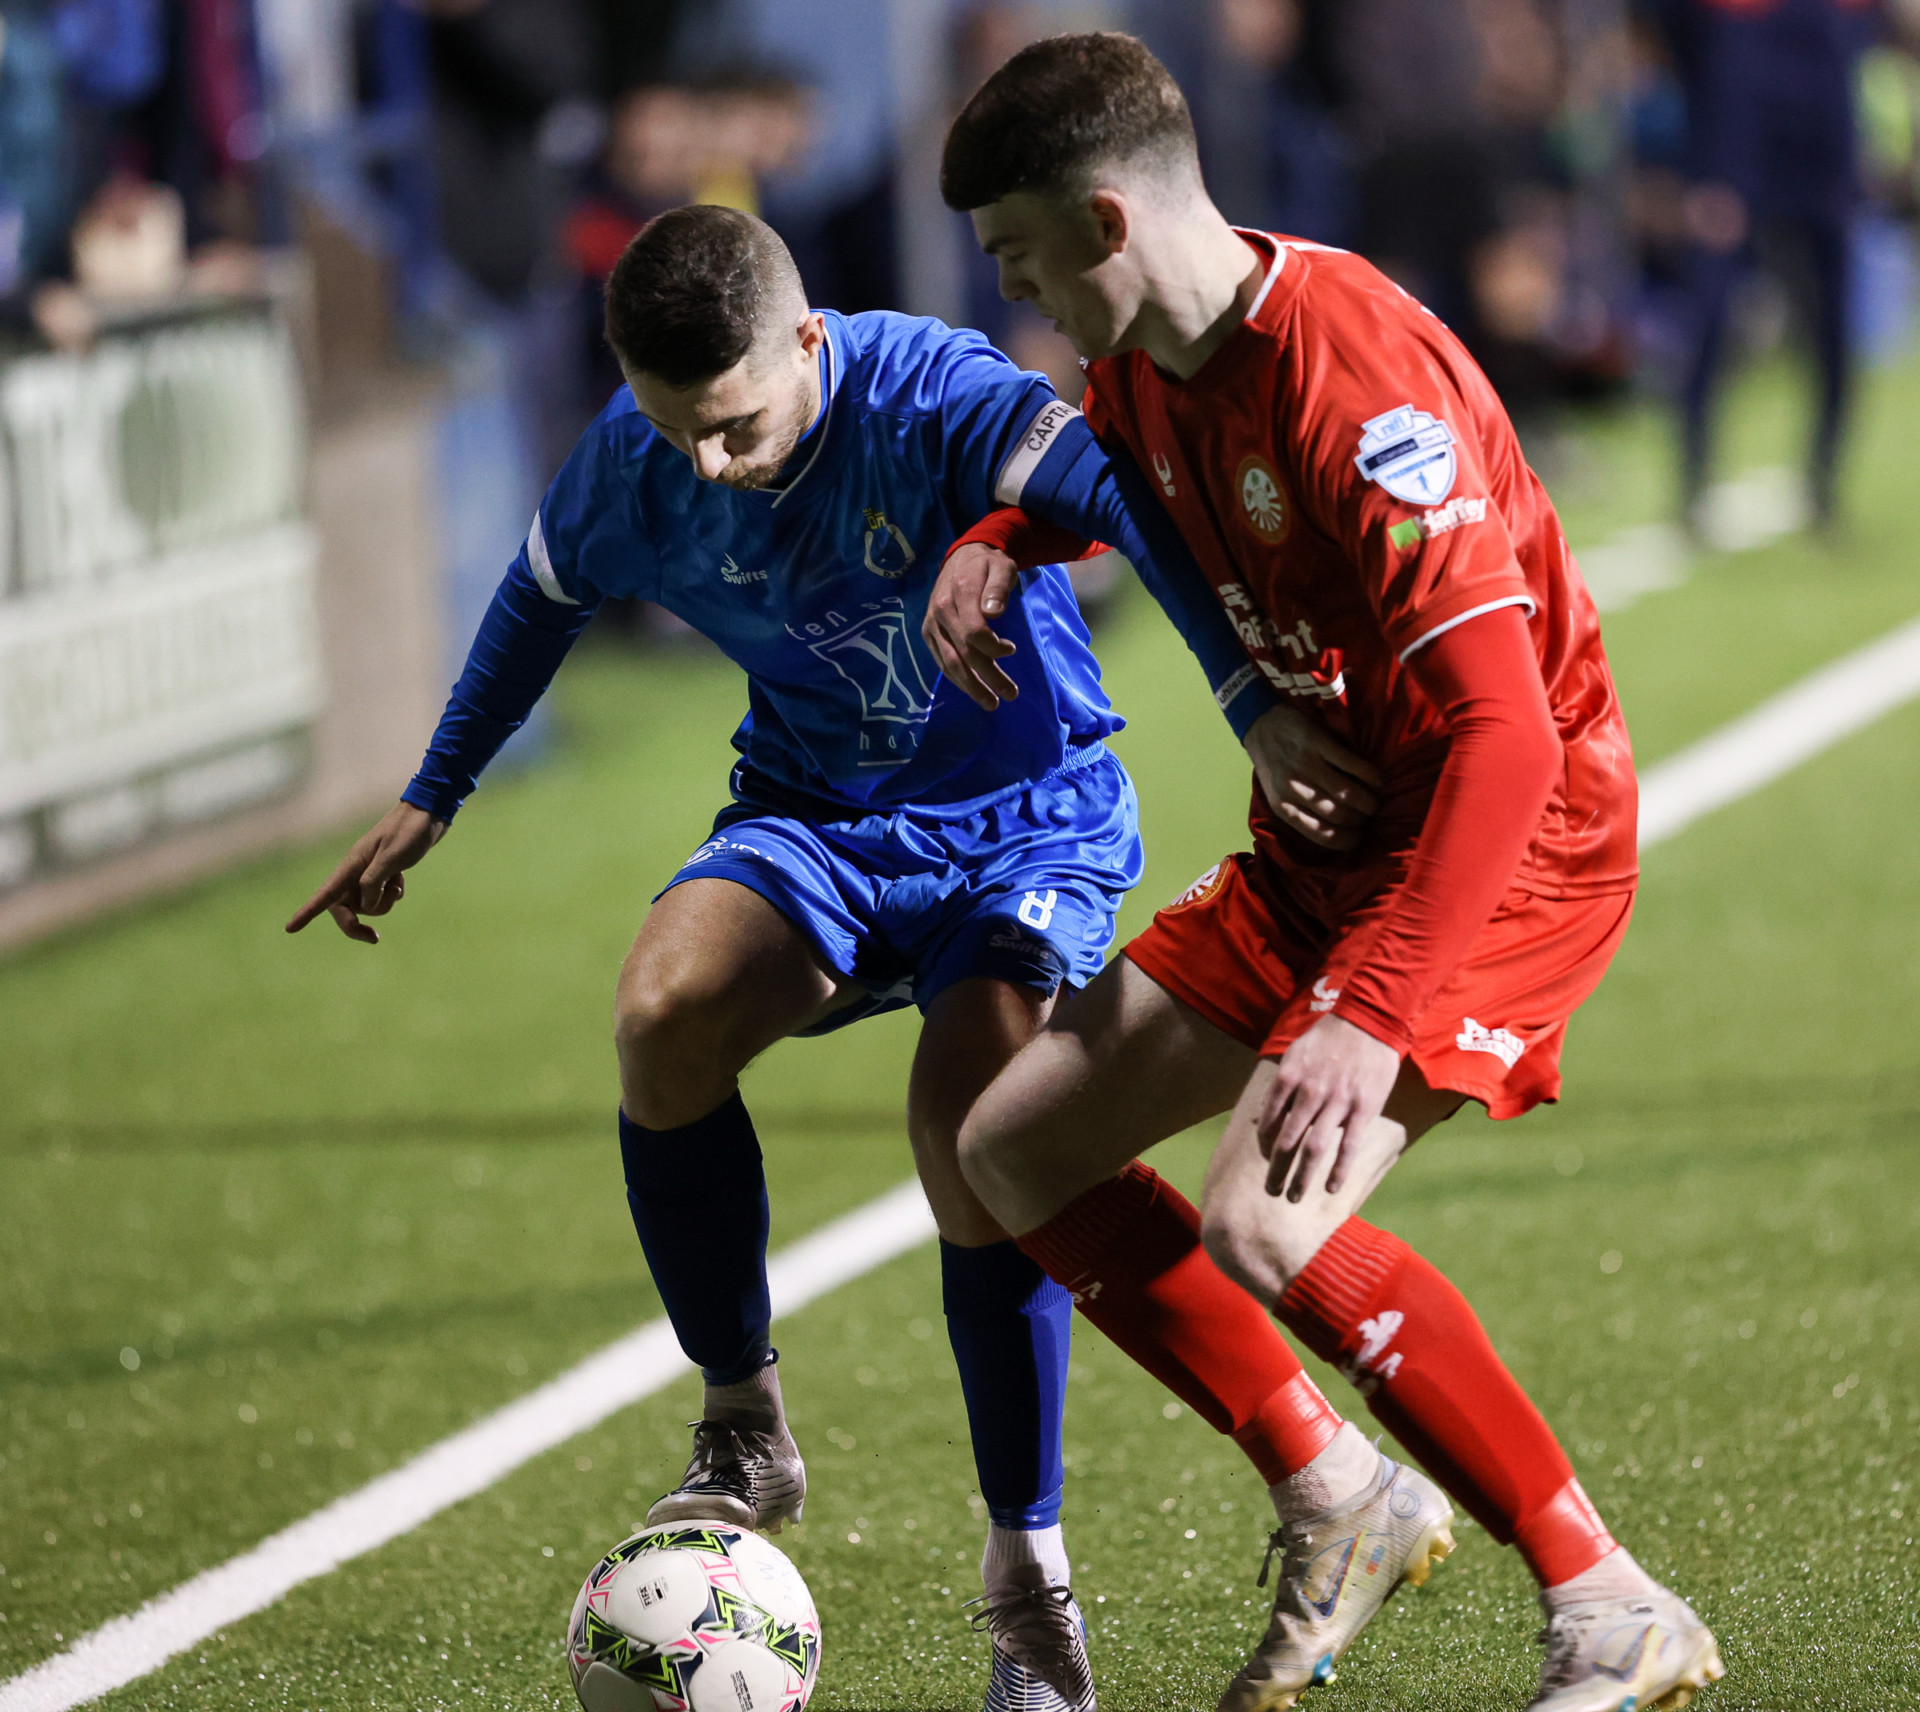 Blues next up for Swifts following first win of the season